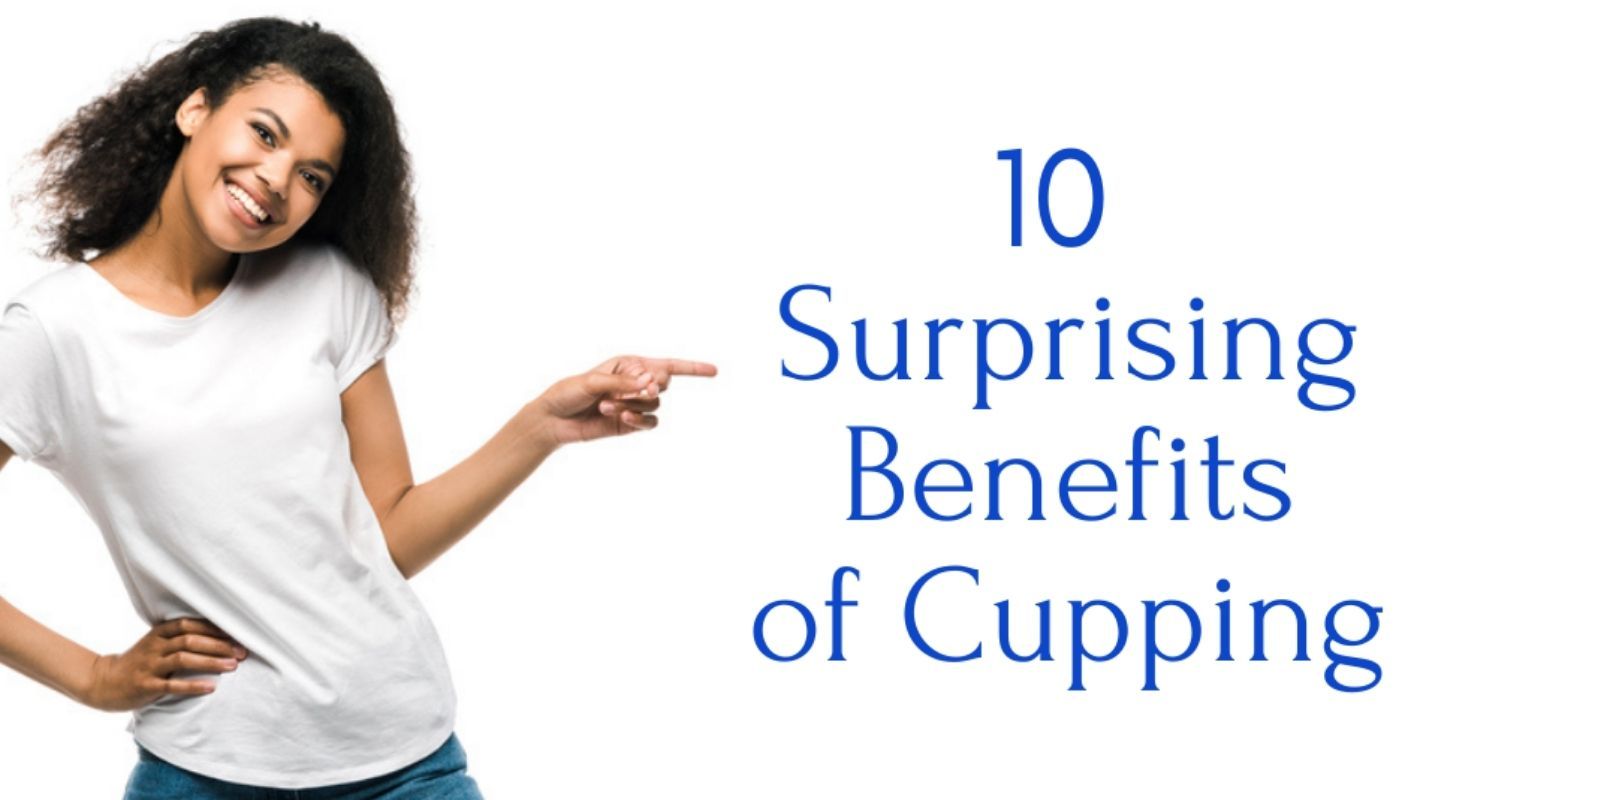 10 Surprising Benefits of Cupping